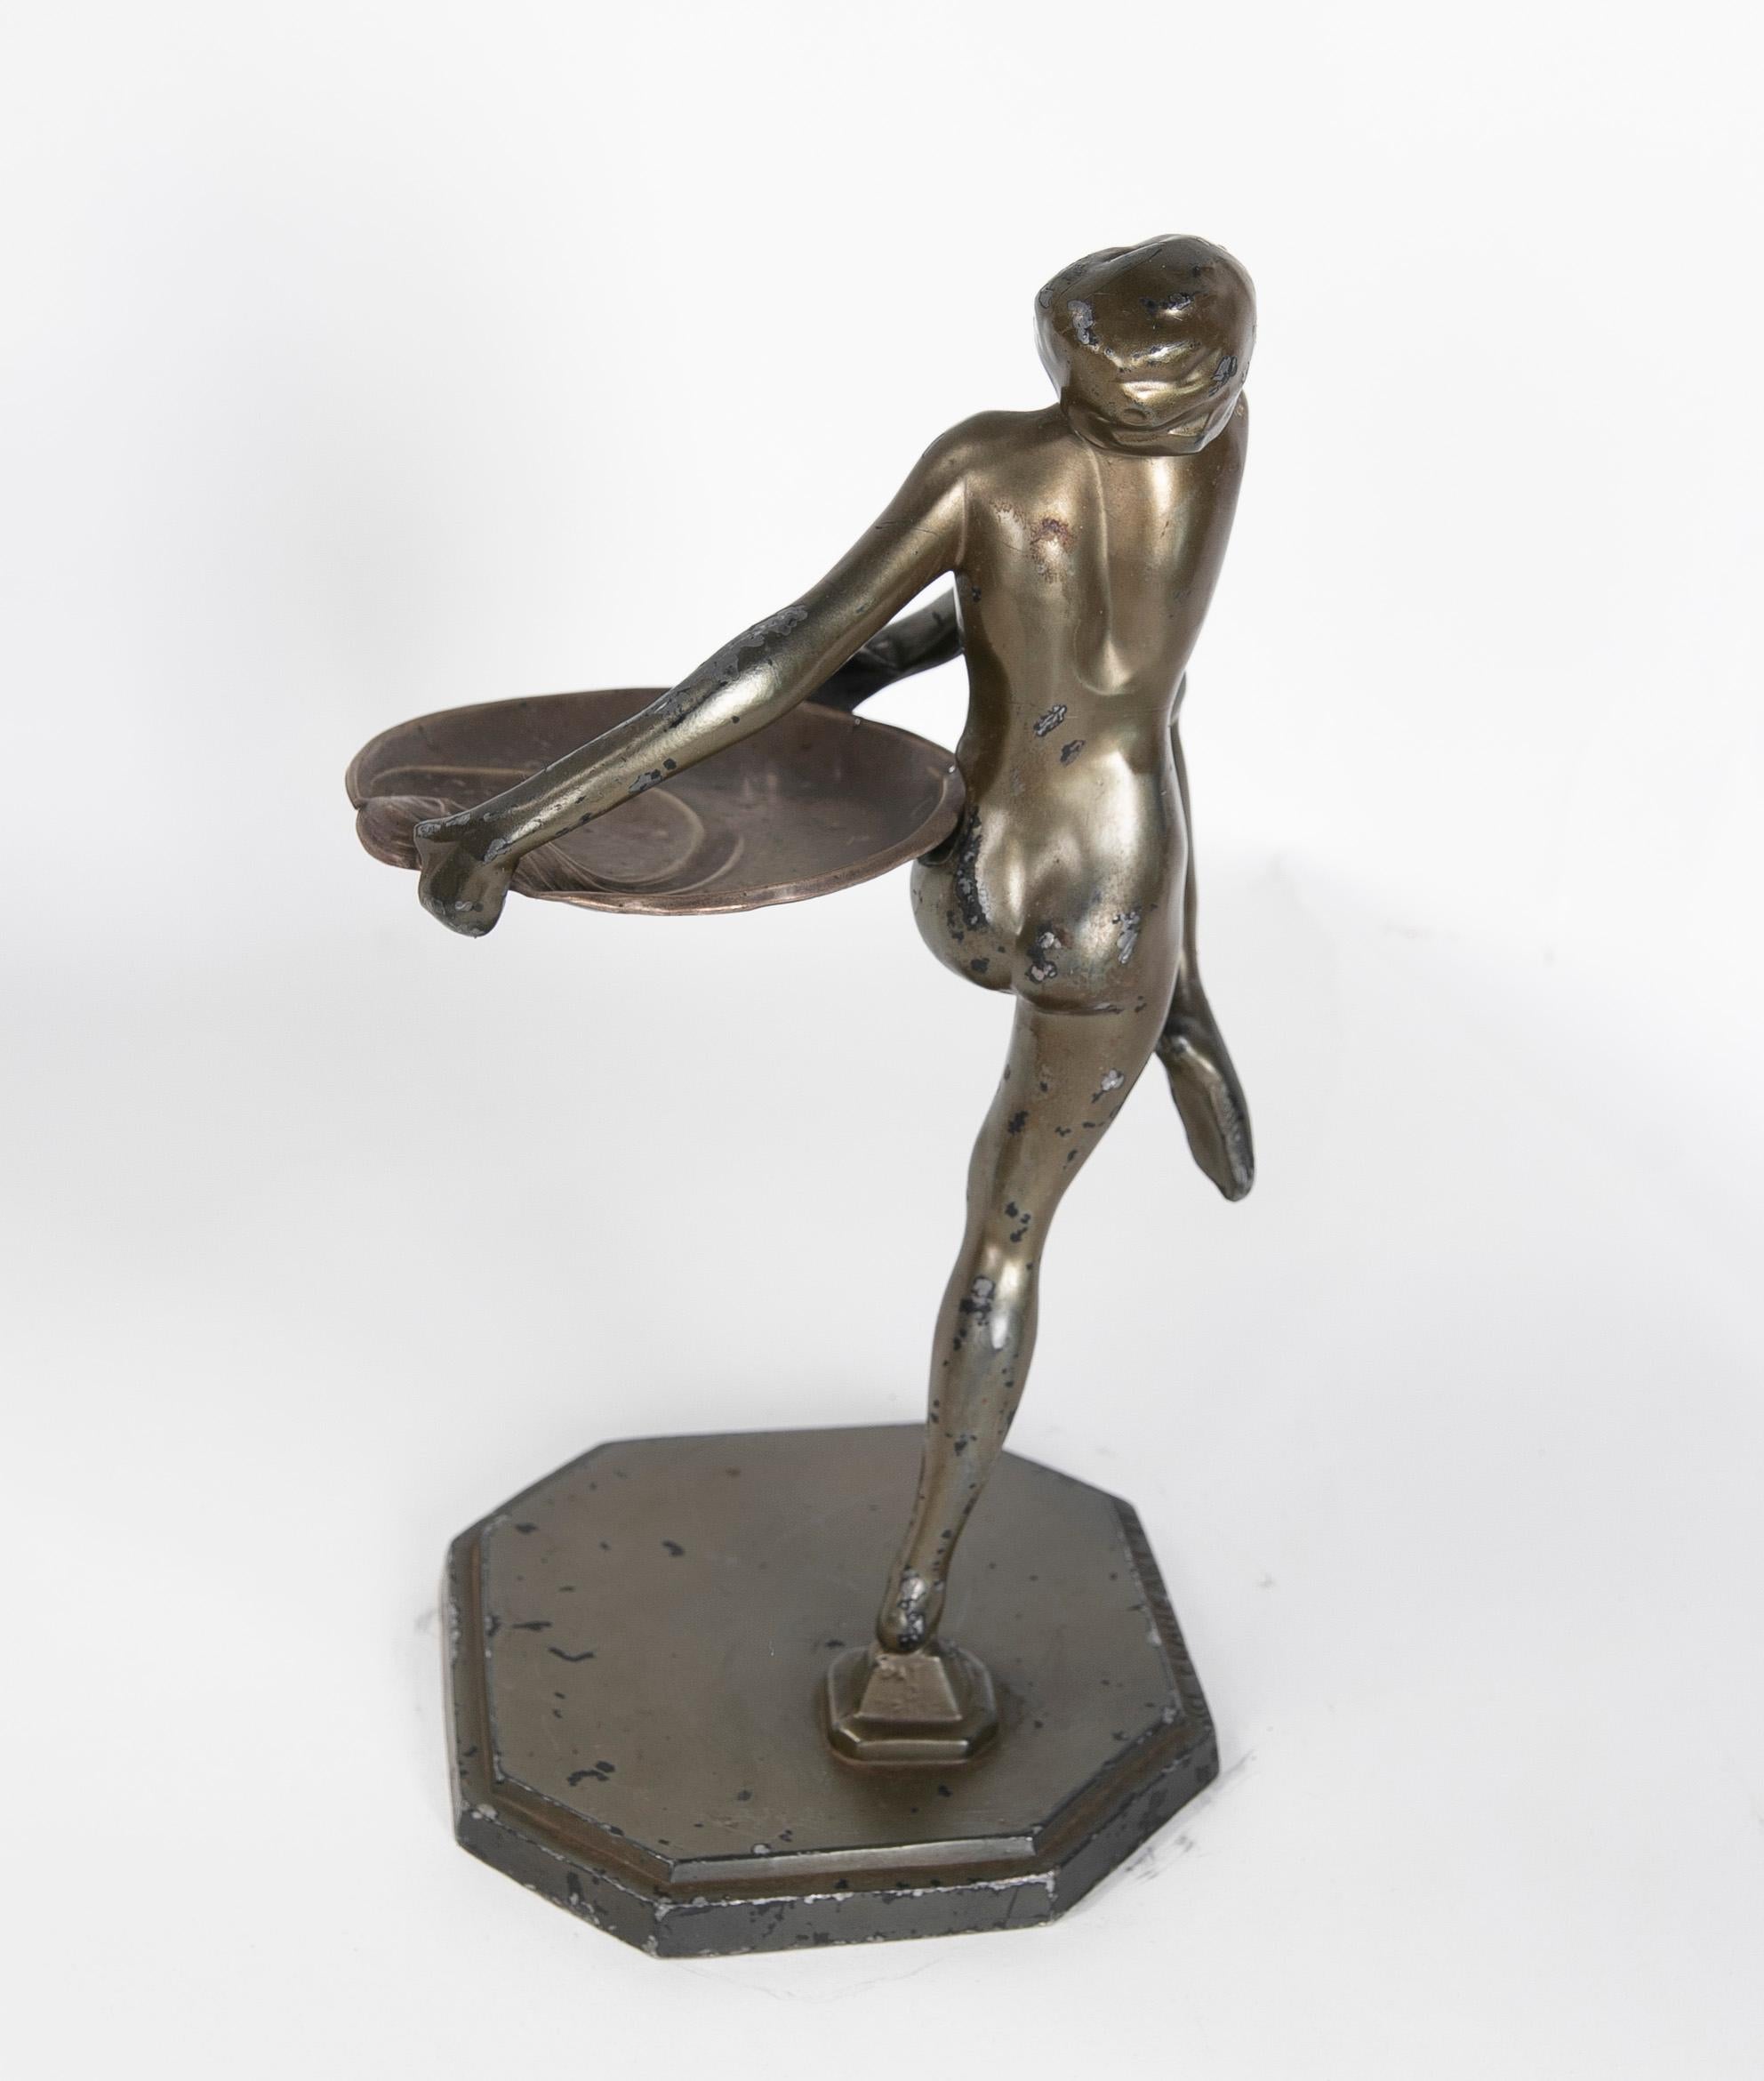 1900s Signed Art Deco Metal Sculpture of a Woman with a Silver Tray  For Sale 7